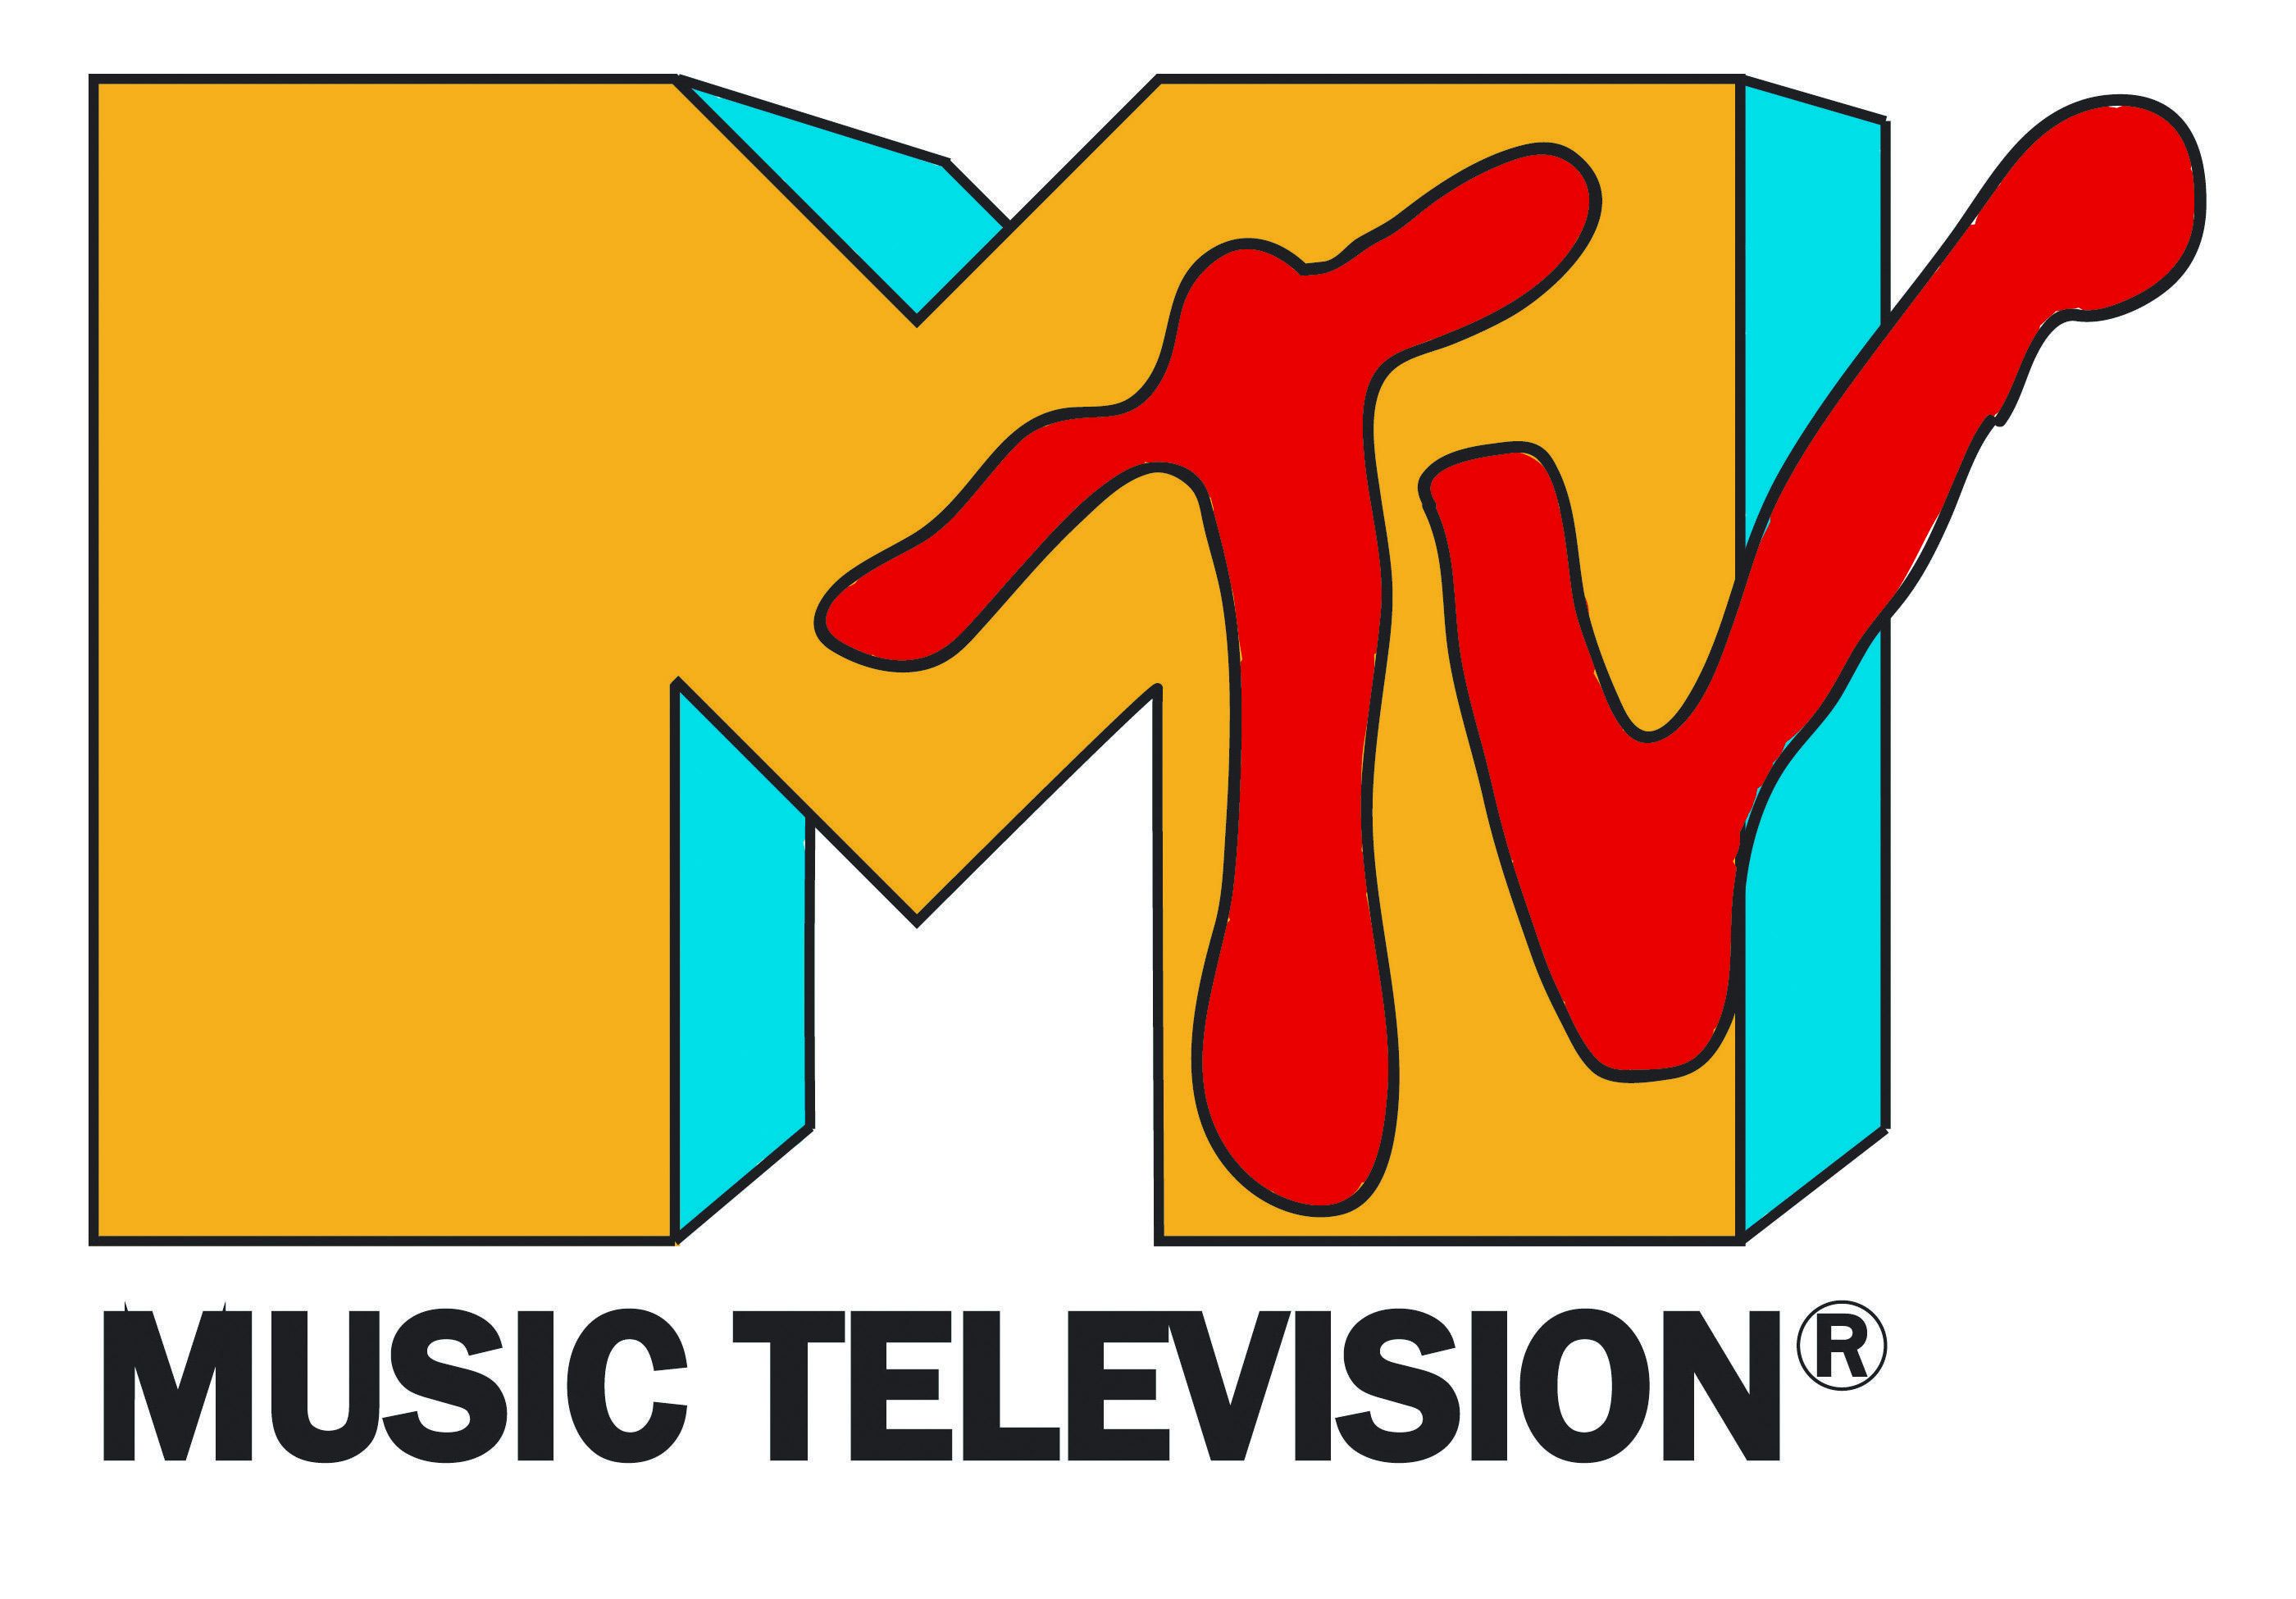 MTV was launched 40 years ago today - thanks for 15 years of music...